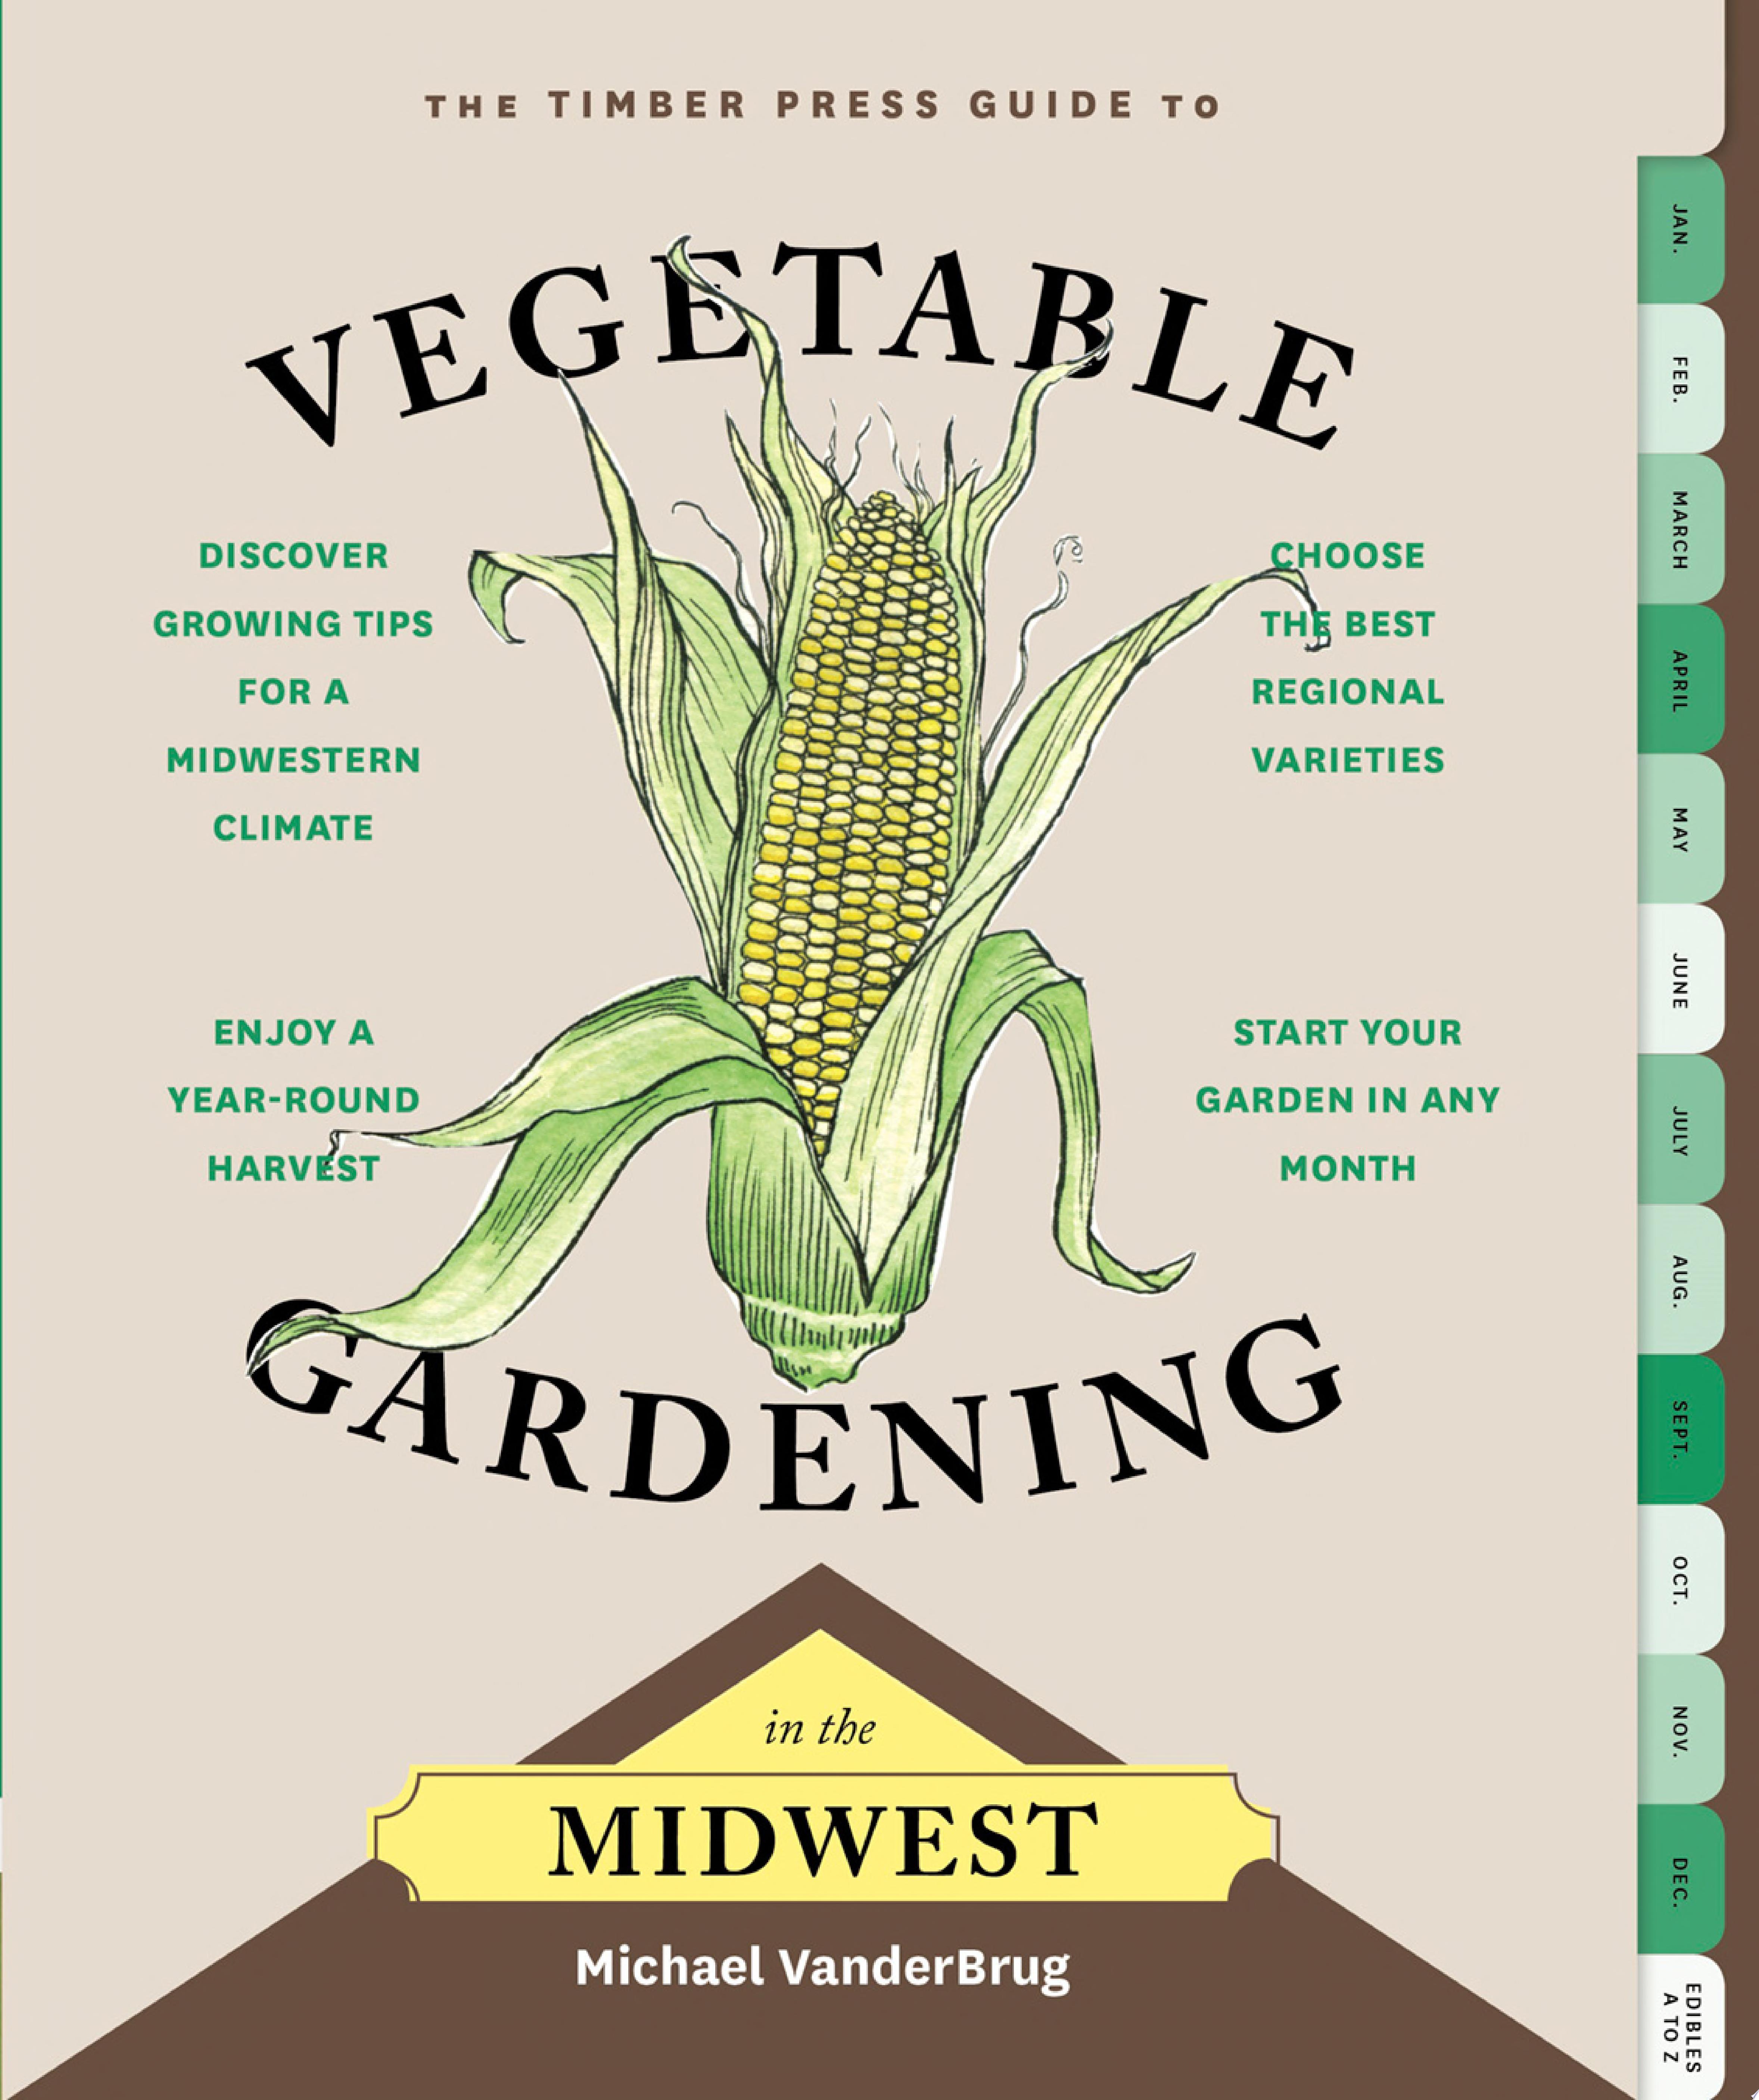 Image for "The Timber Press Guide to Vegetable Gardening in the Midwest"